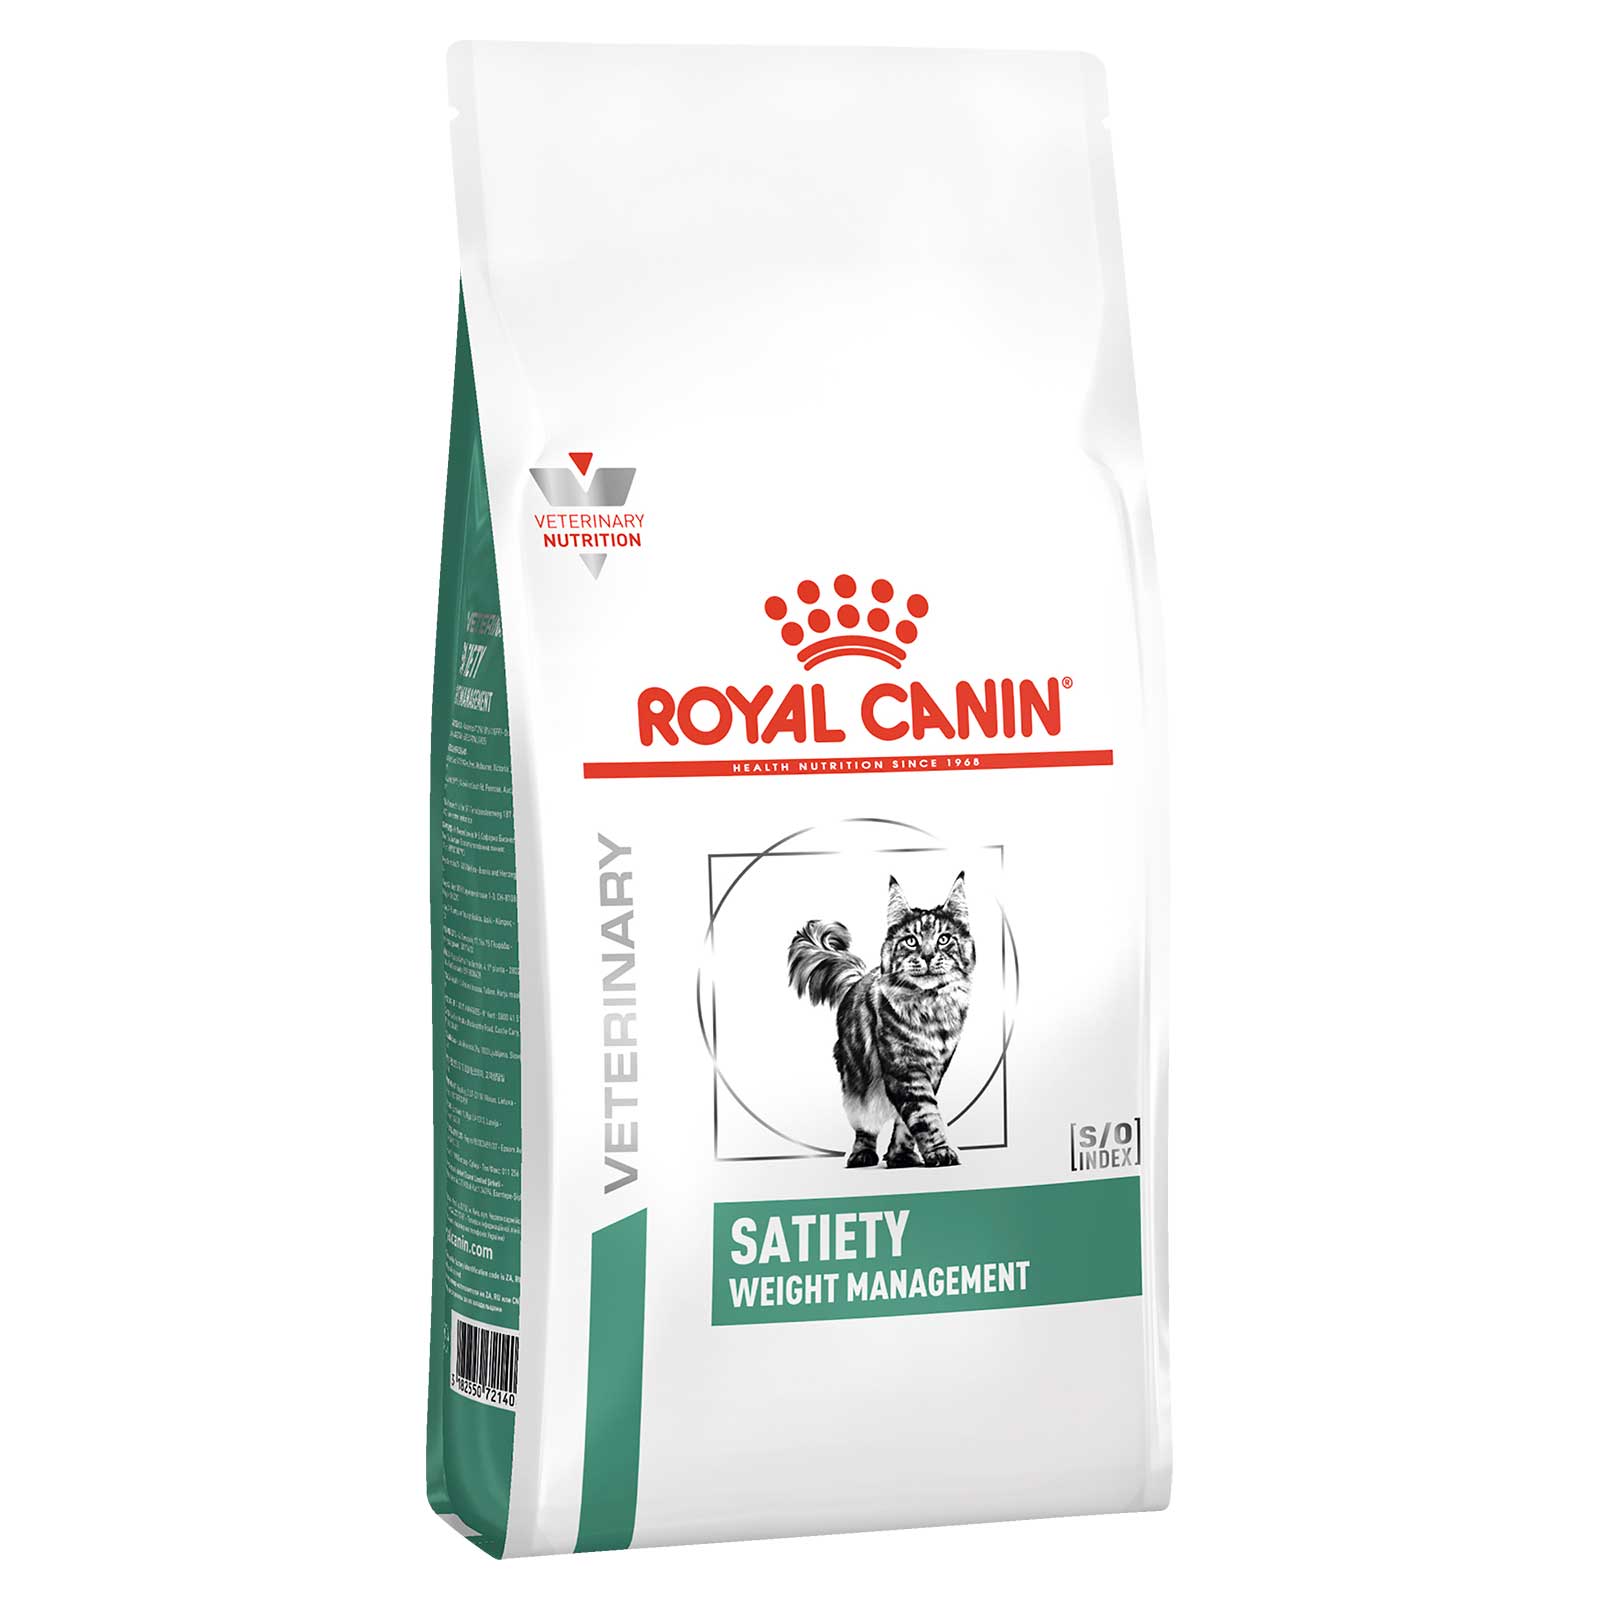 Royal Canin Veterinary Cat Food Satiety Weight Management